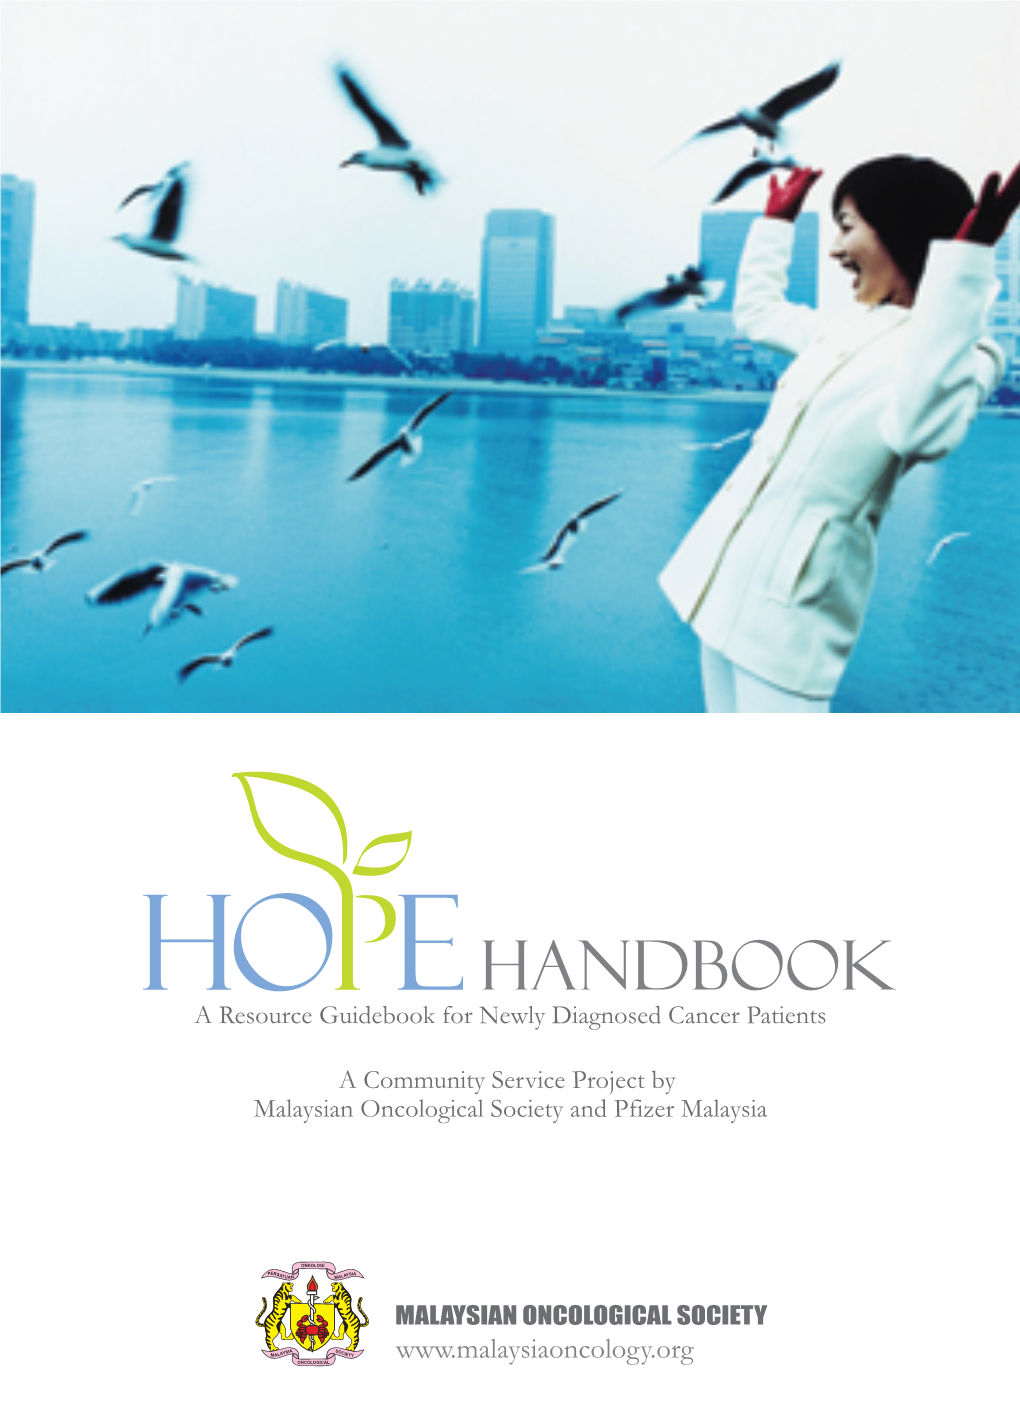 Handbook a Resource Guidebook for Newly Diagnosed Cancer Patients